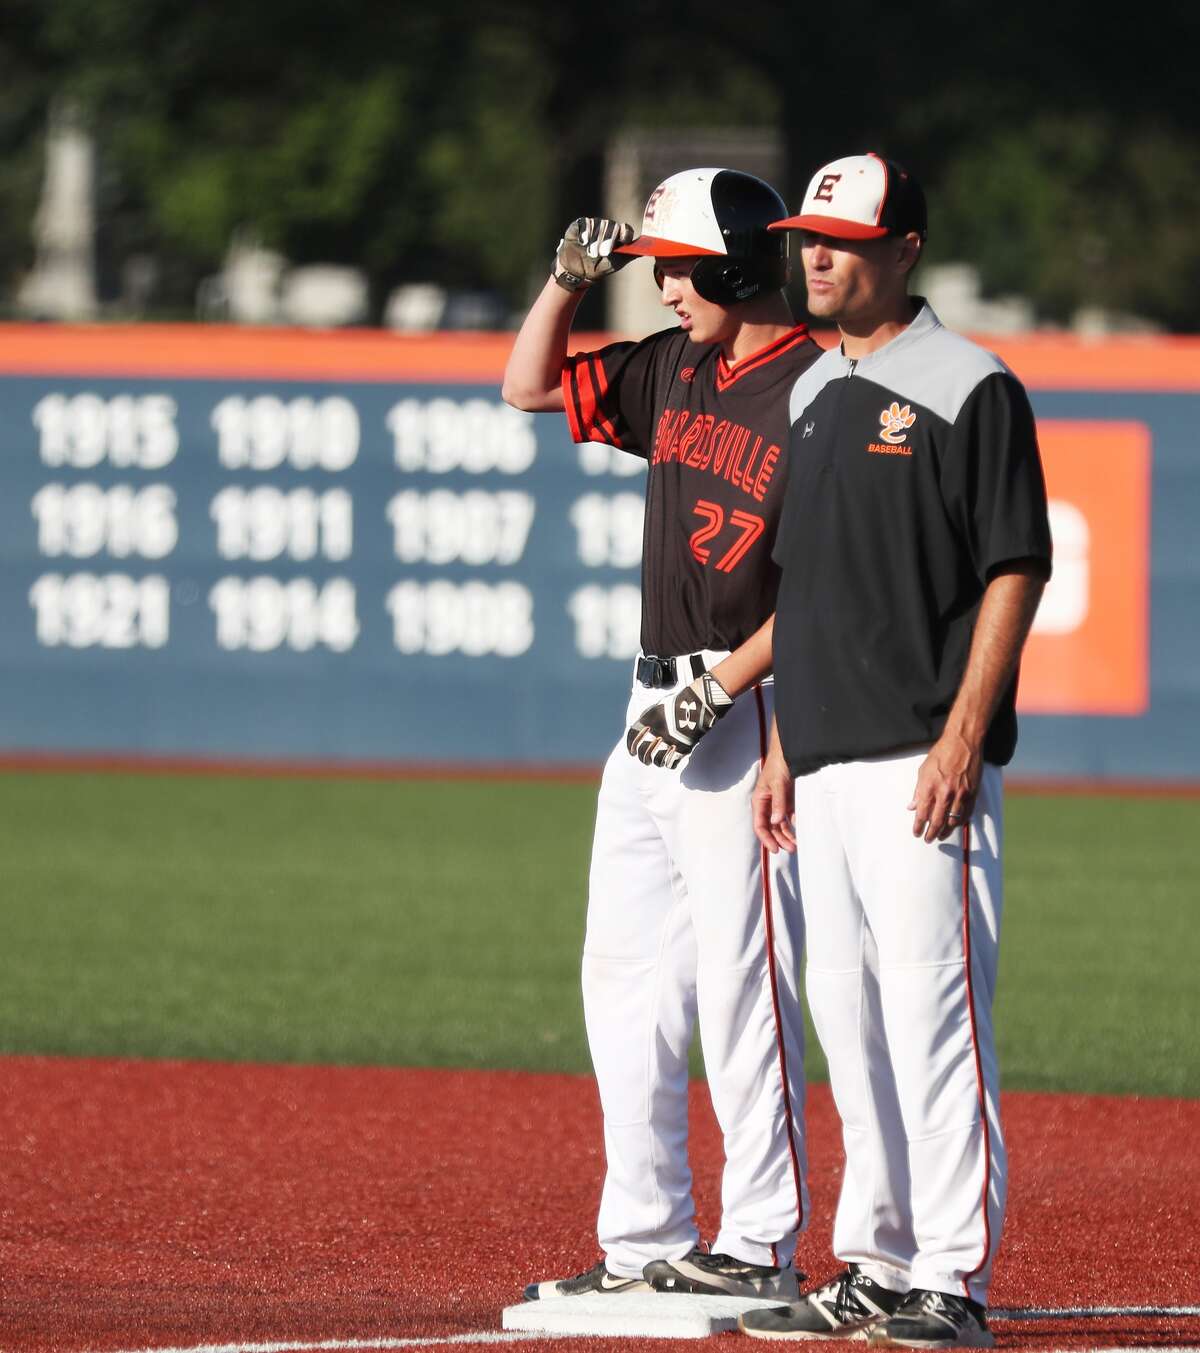 Edwardsville’s Cole Hampton, left, stands at first base after an RBI single. Assistant coach Craig Ohlau stands by his side.